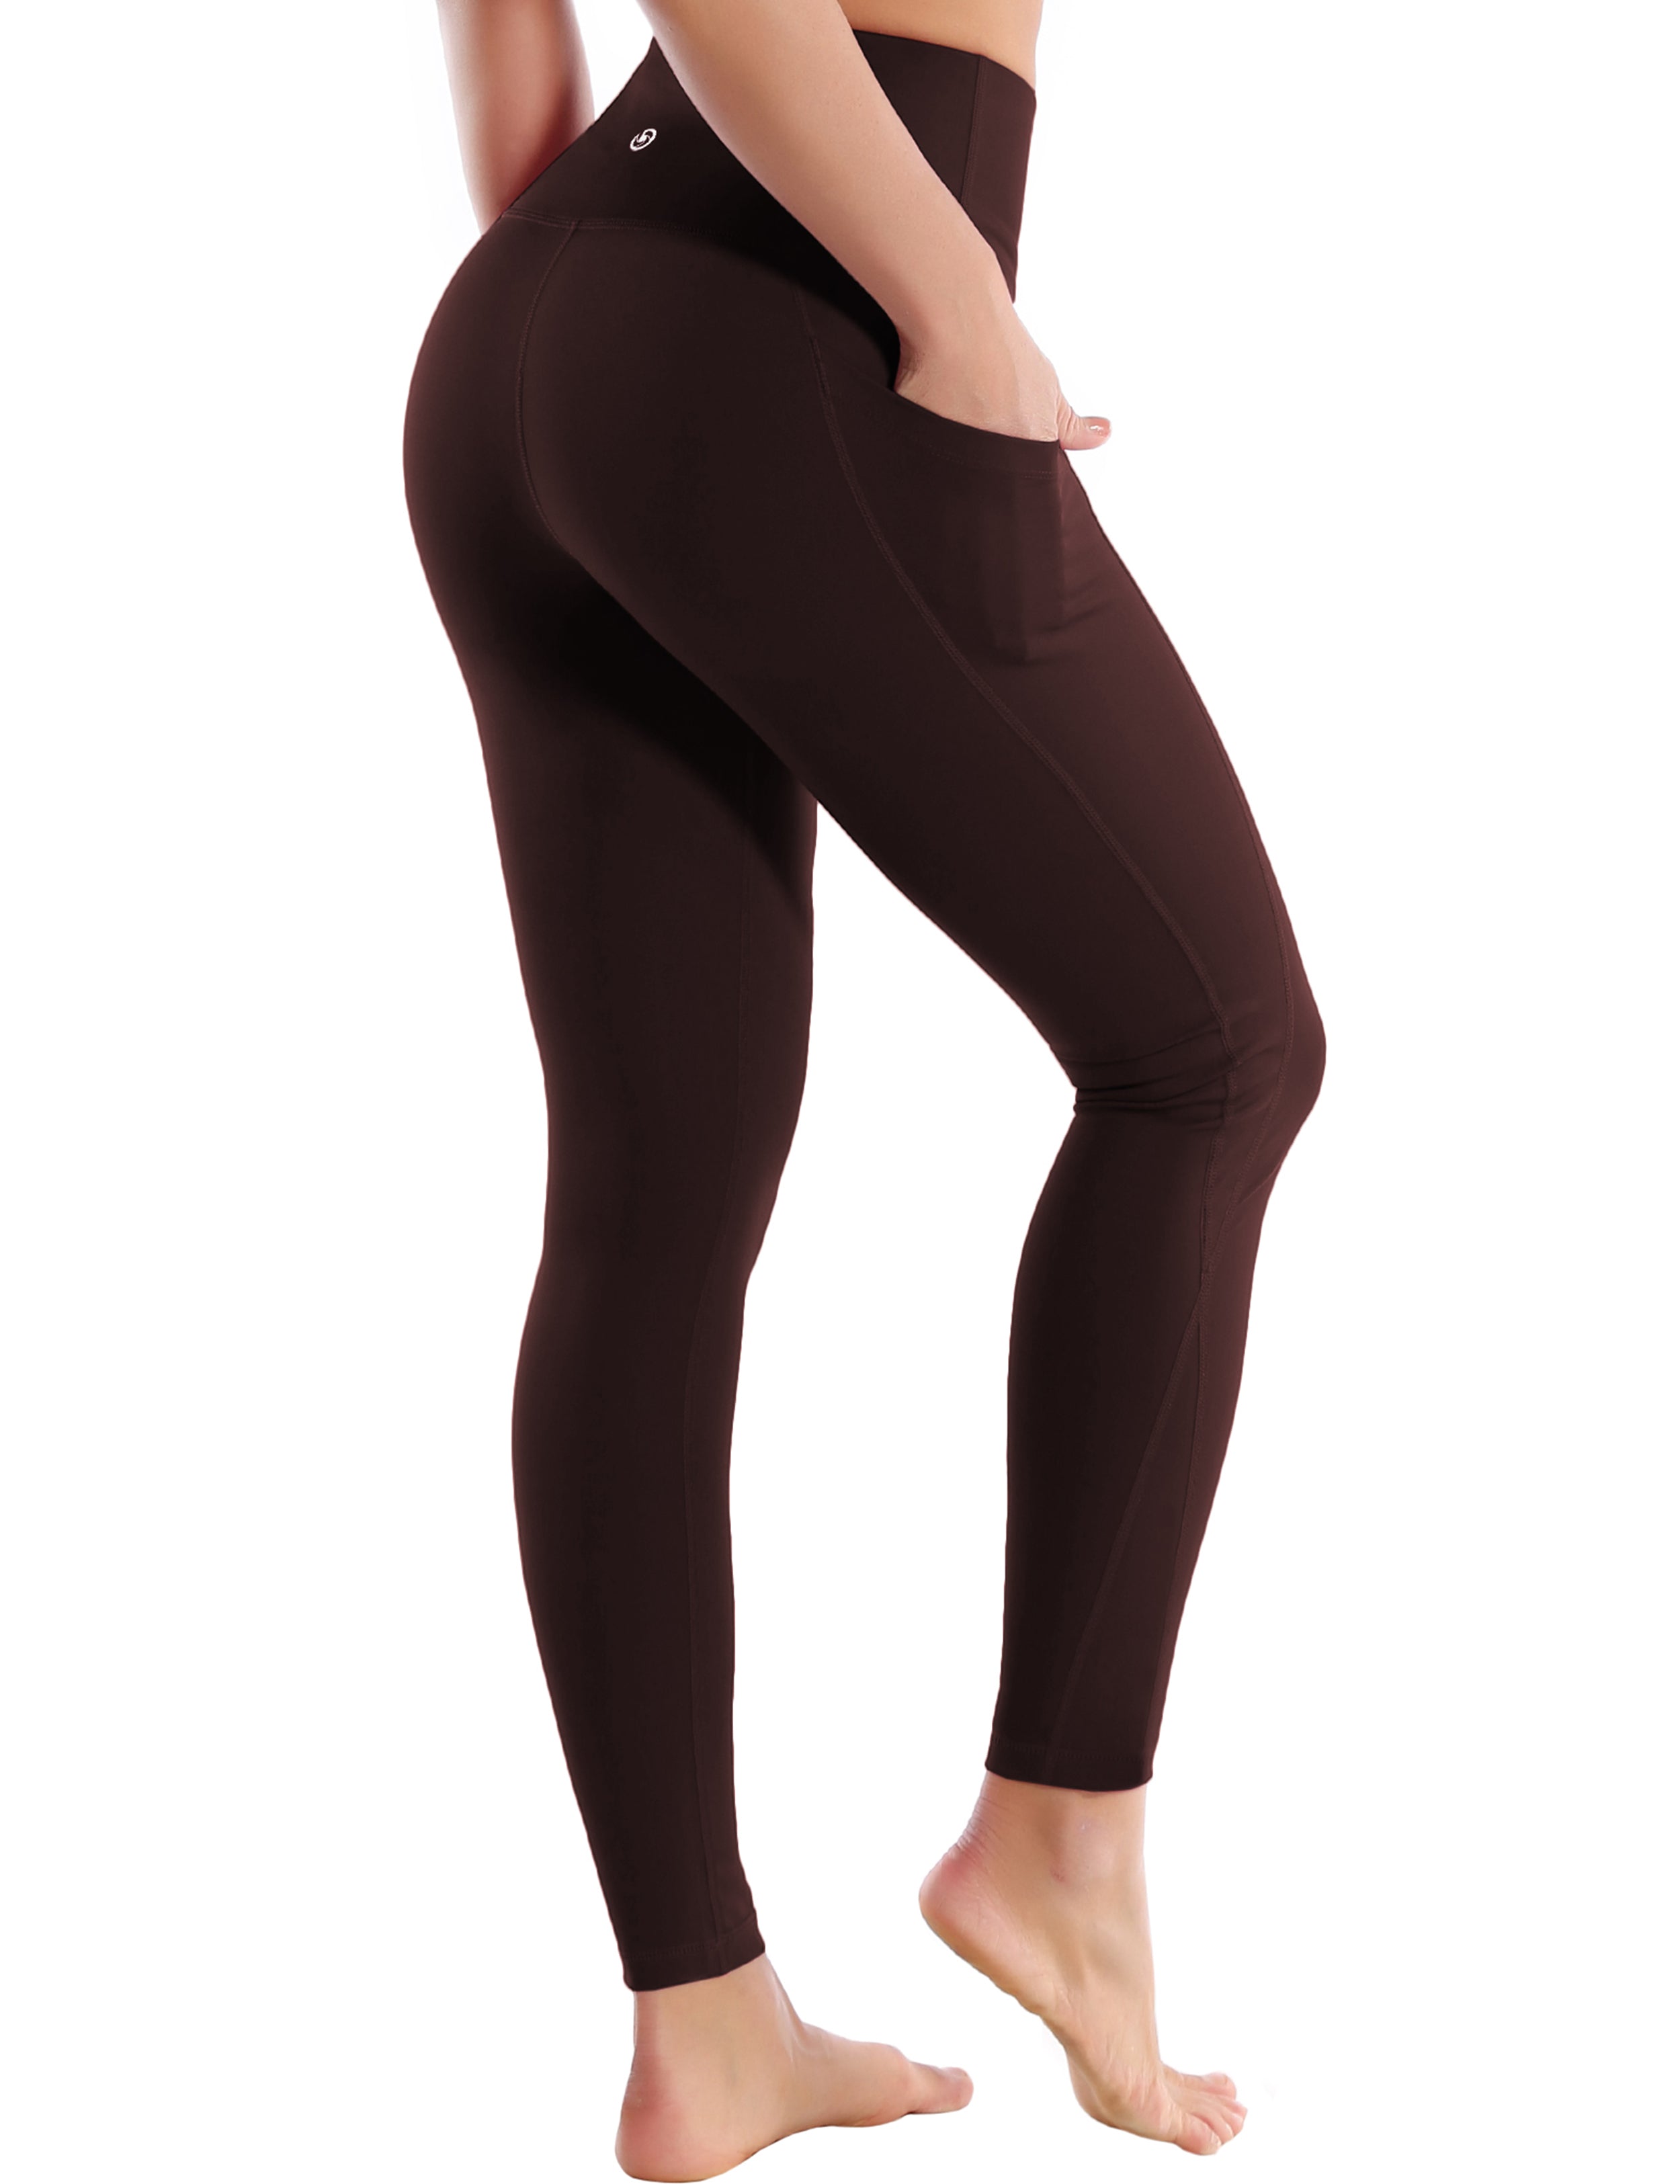 High Waist Side Pockets Pilates Pants mahoganymaroon 75% Nylon, 25% Spandex Fabric doesn't attract lint easily 4-way stretch No see-through Moisture-wicking Tummy control Inner pocket